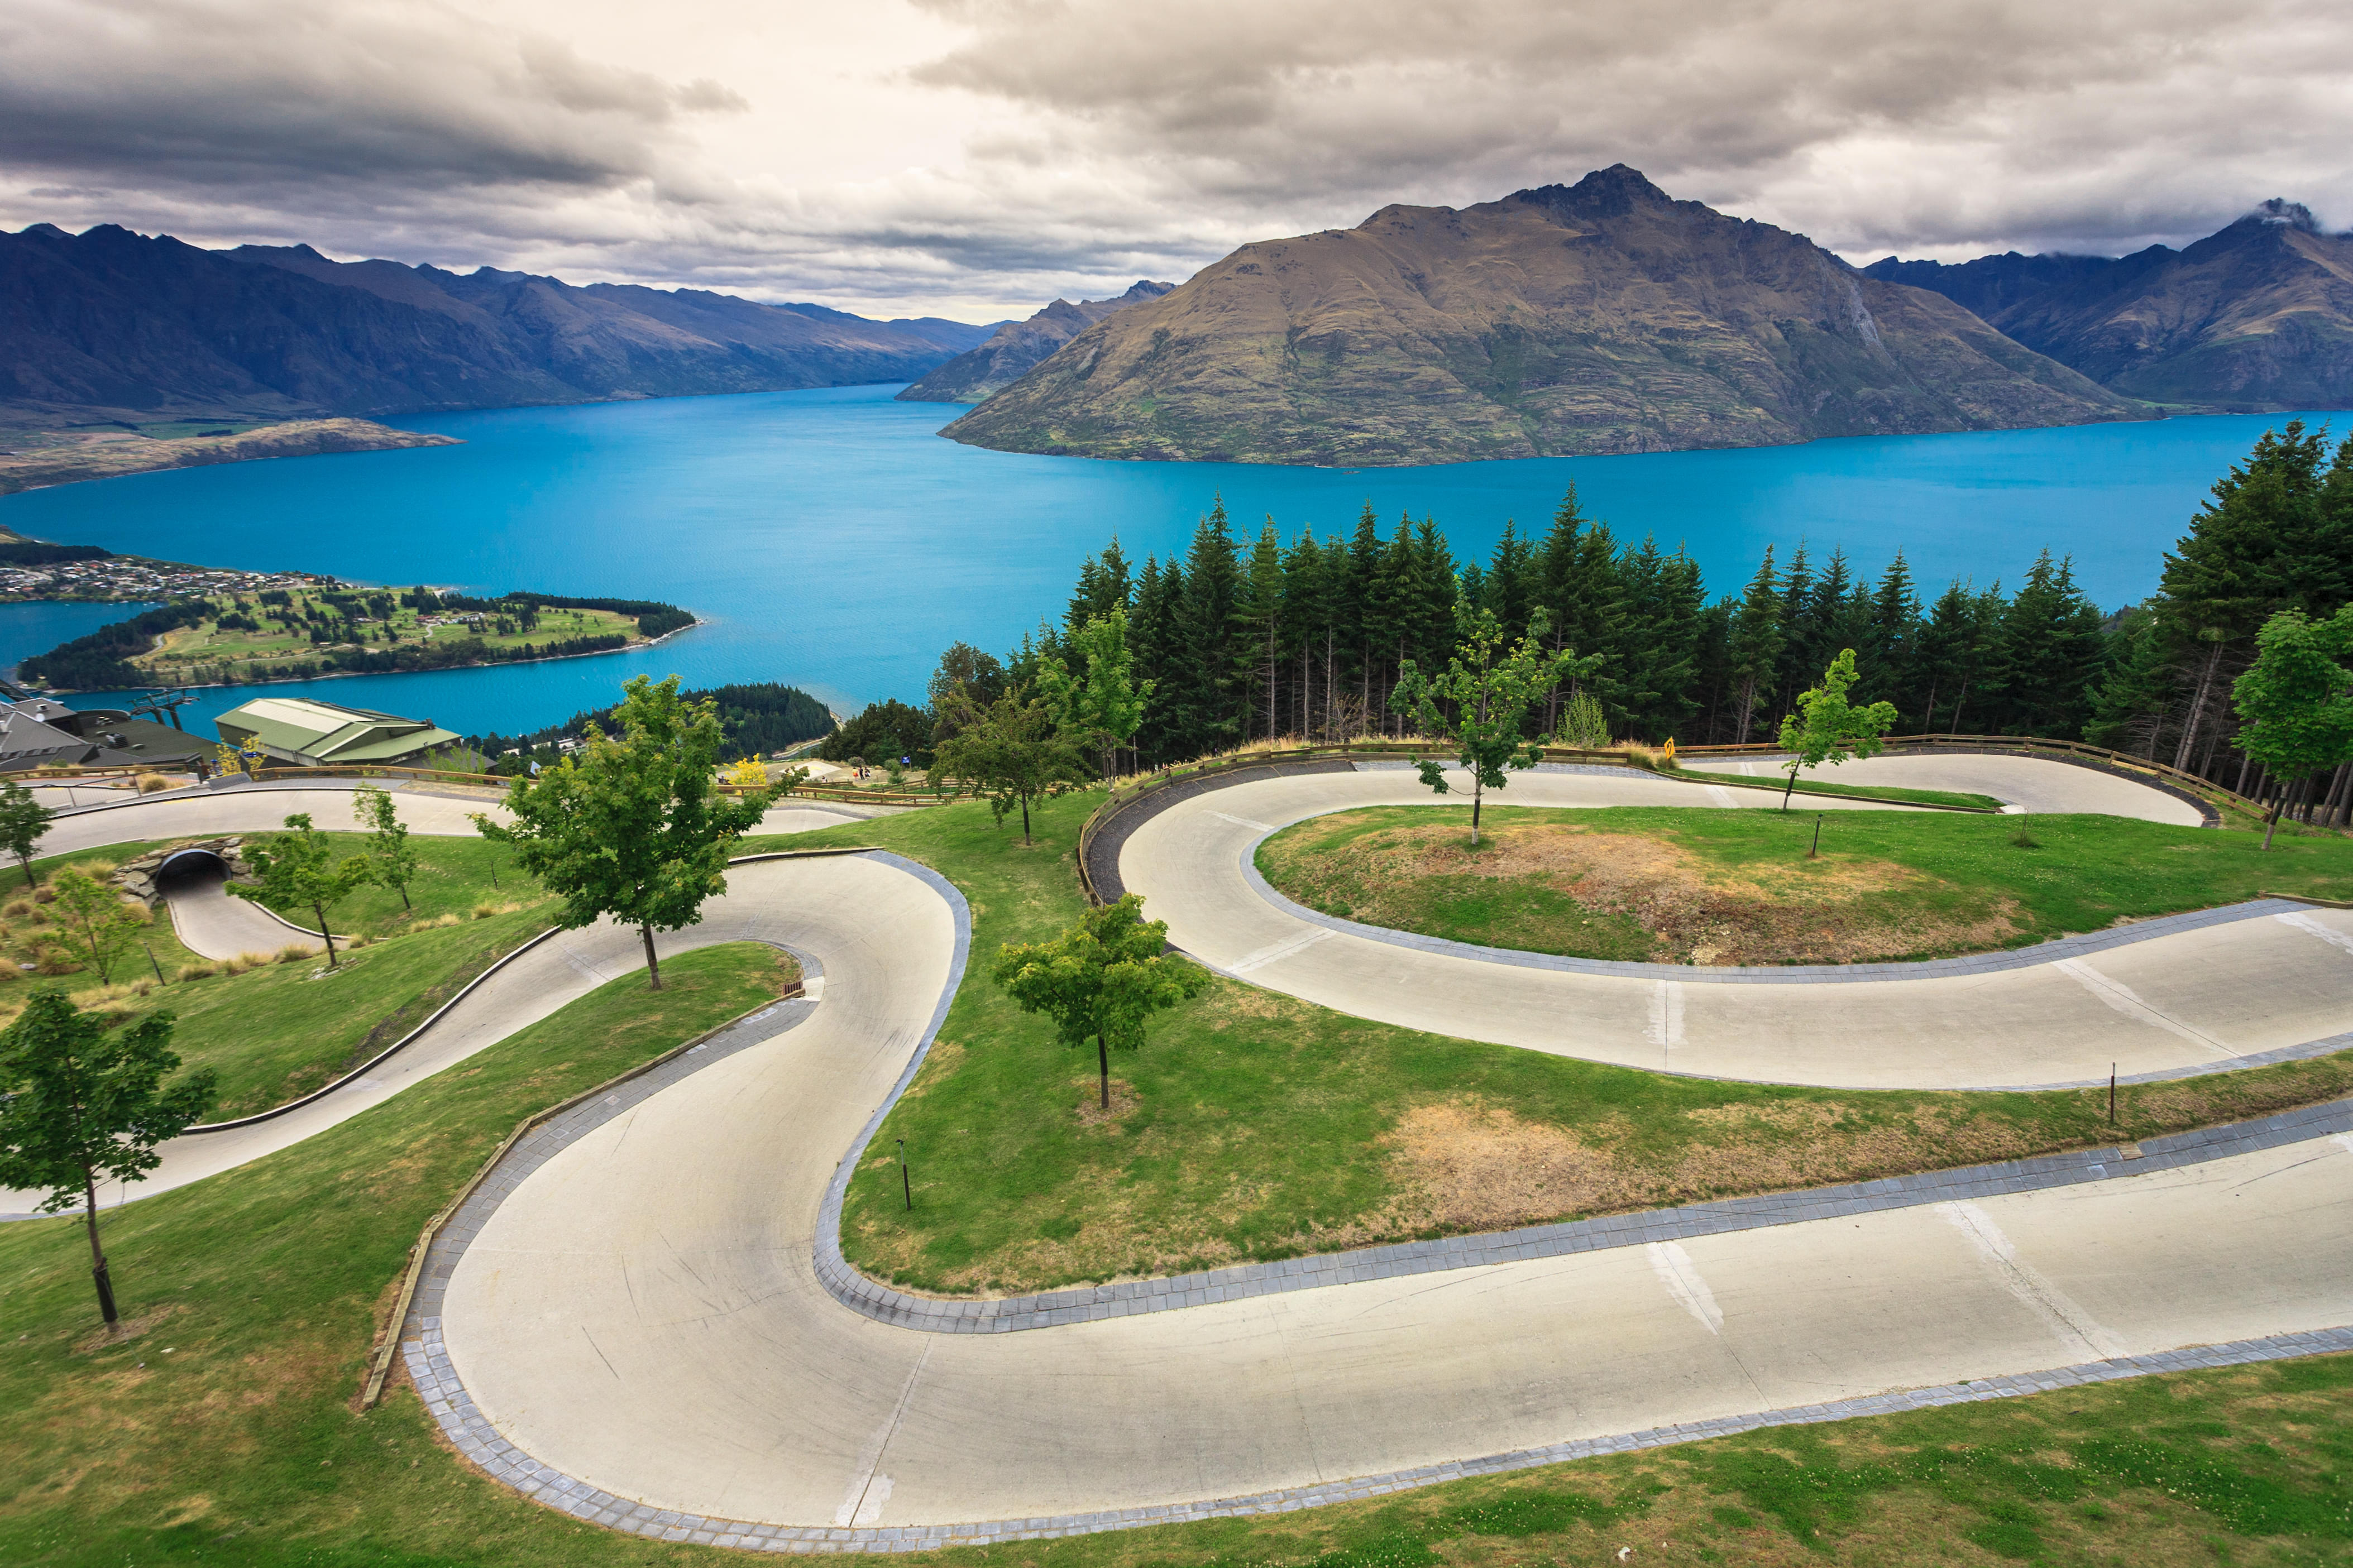 Things to Do in Queenstown